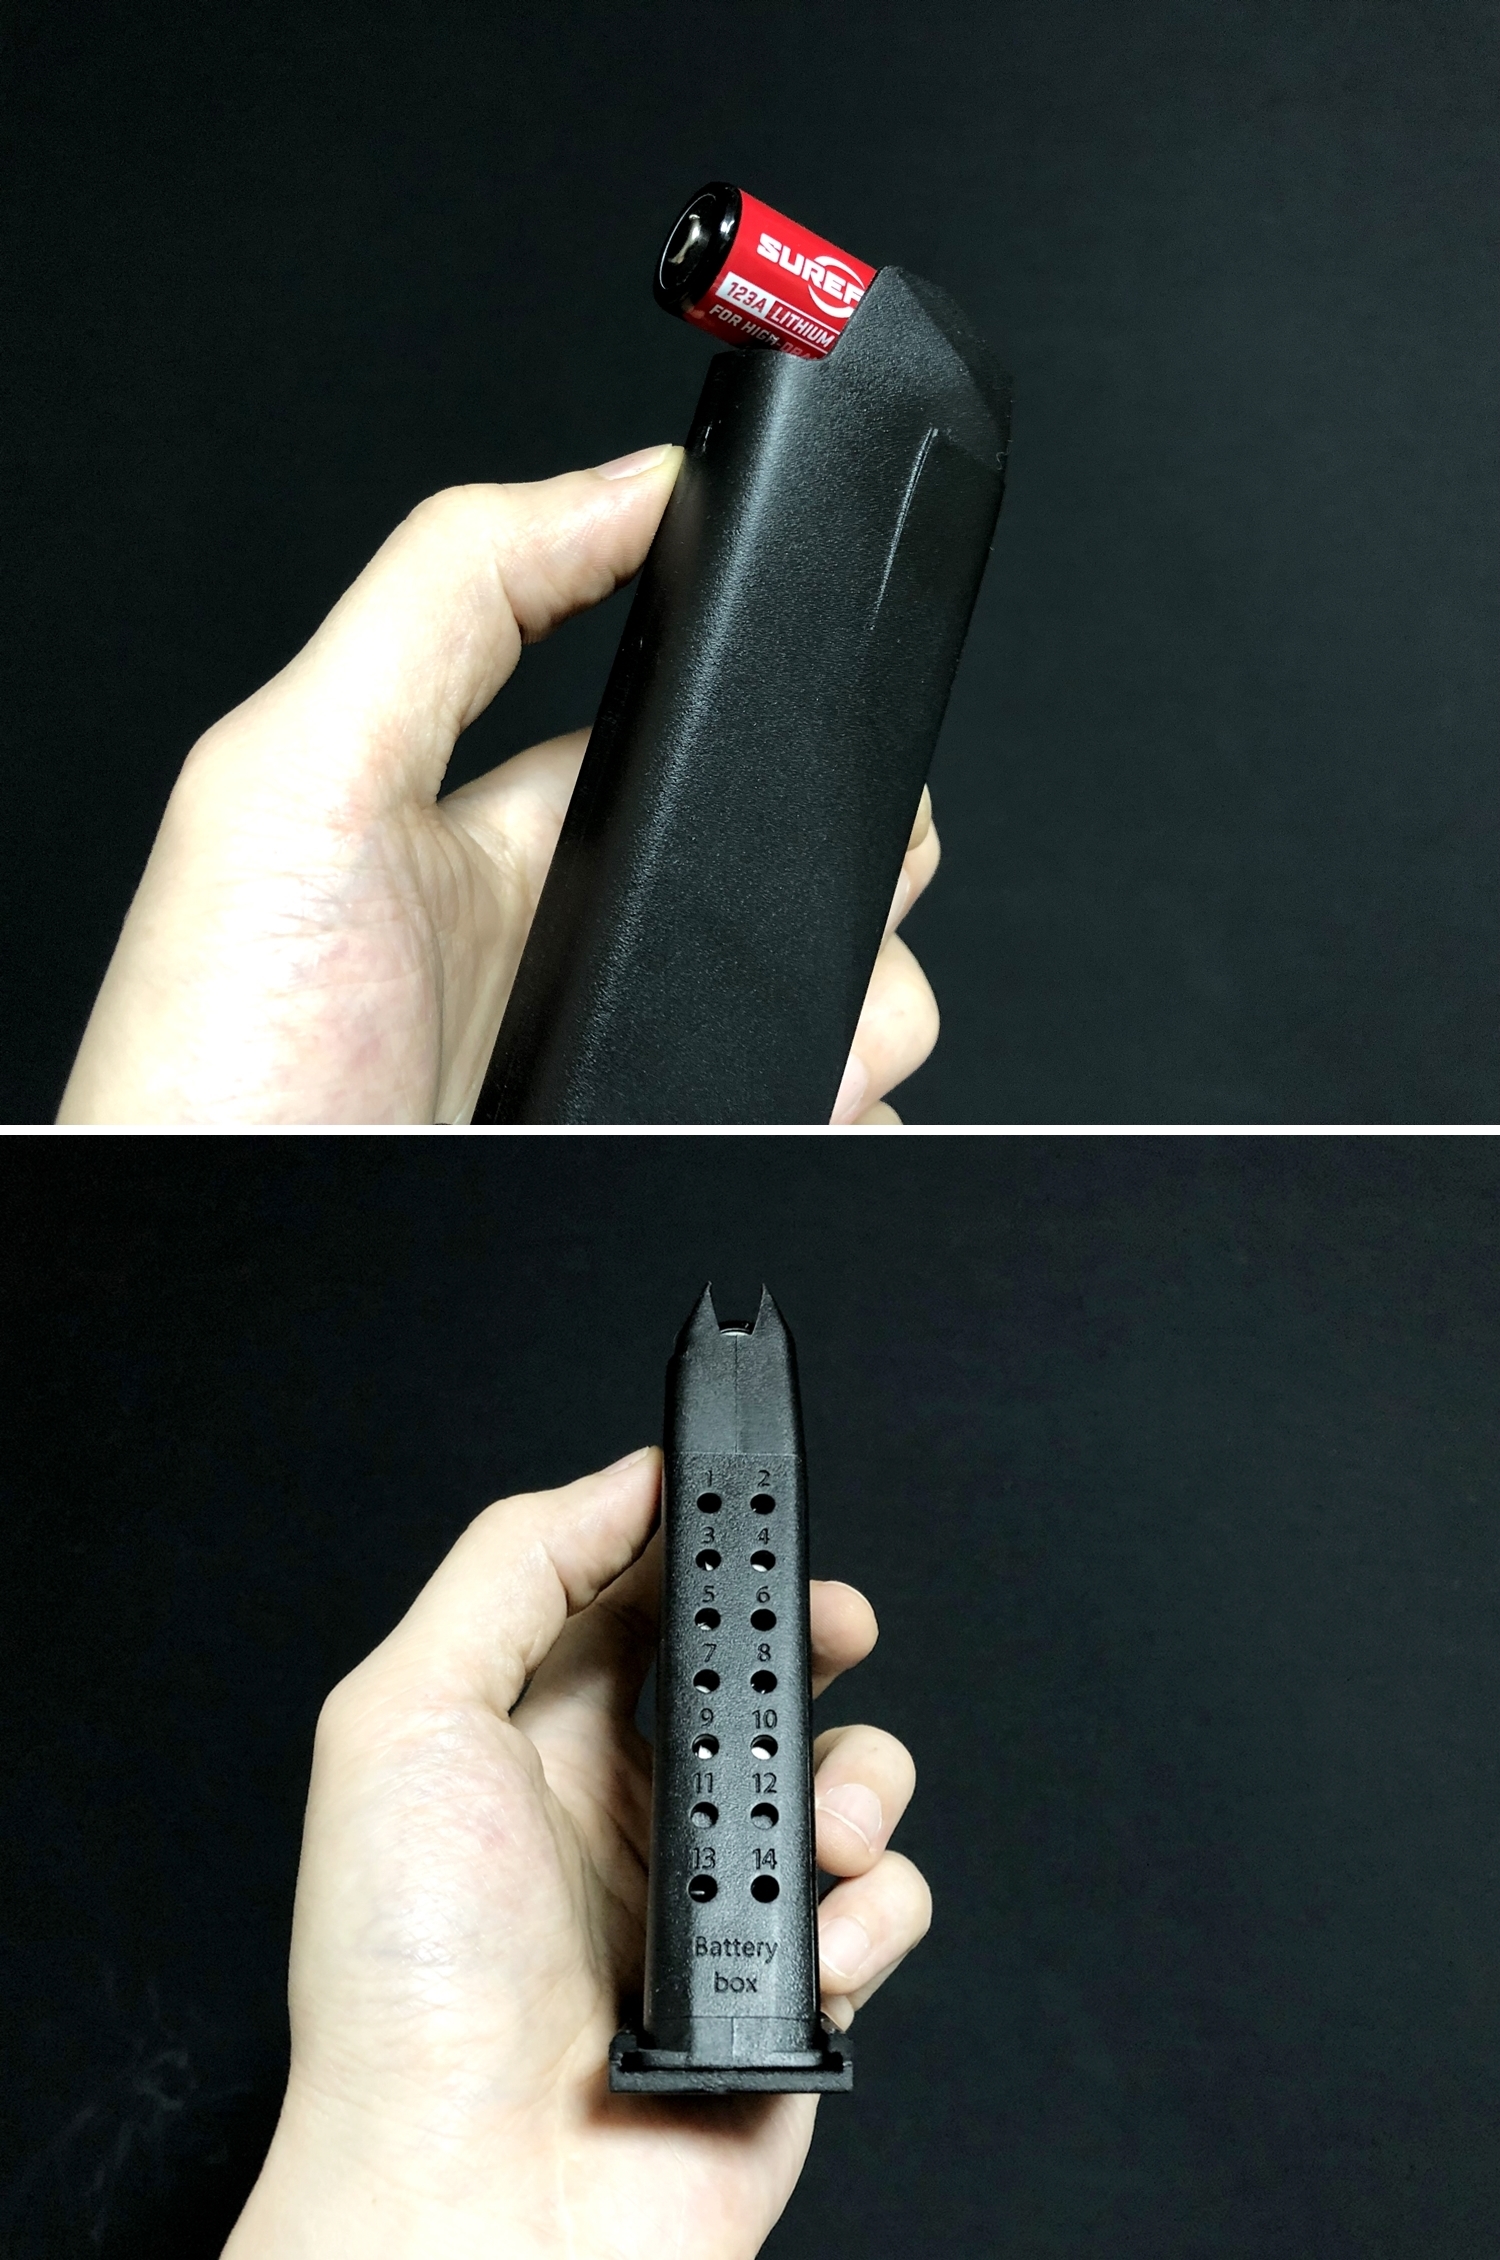 11 TMC GLOCK MAGAZINE STYLE CR123A BATTERY CASE グロック マガジン スタイル 電池ケース SUREFIRE SF123A 純正電池!! 購入 開封 取付 レビュー!!